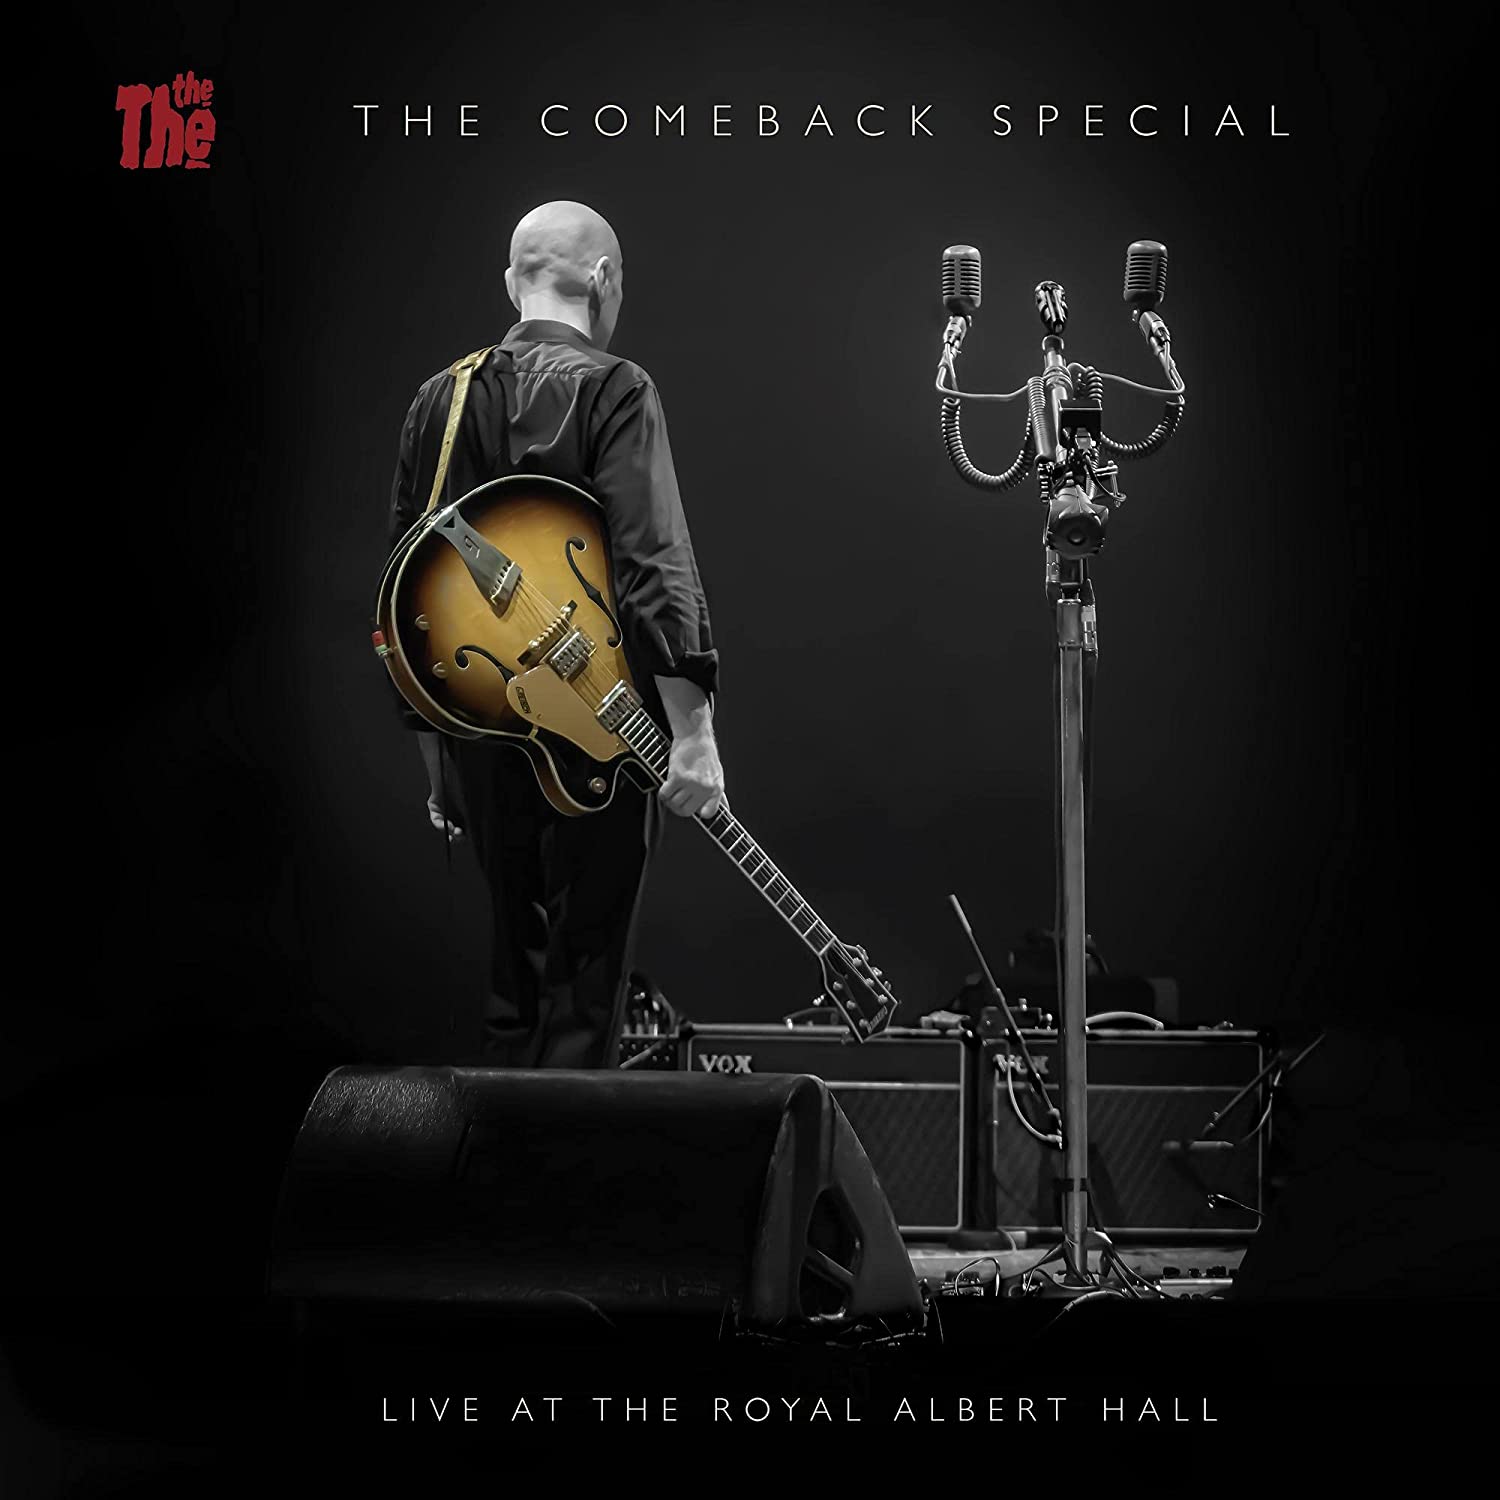 The The - Comeback Special |  Vinyl LP | The The - Comeback Special (3 LPs) | Records on Vinyl